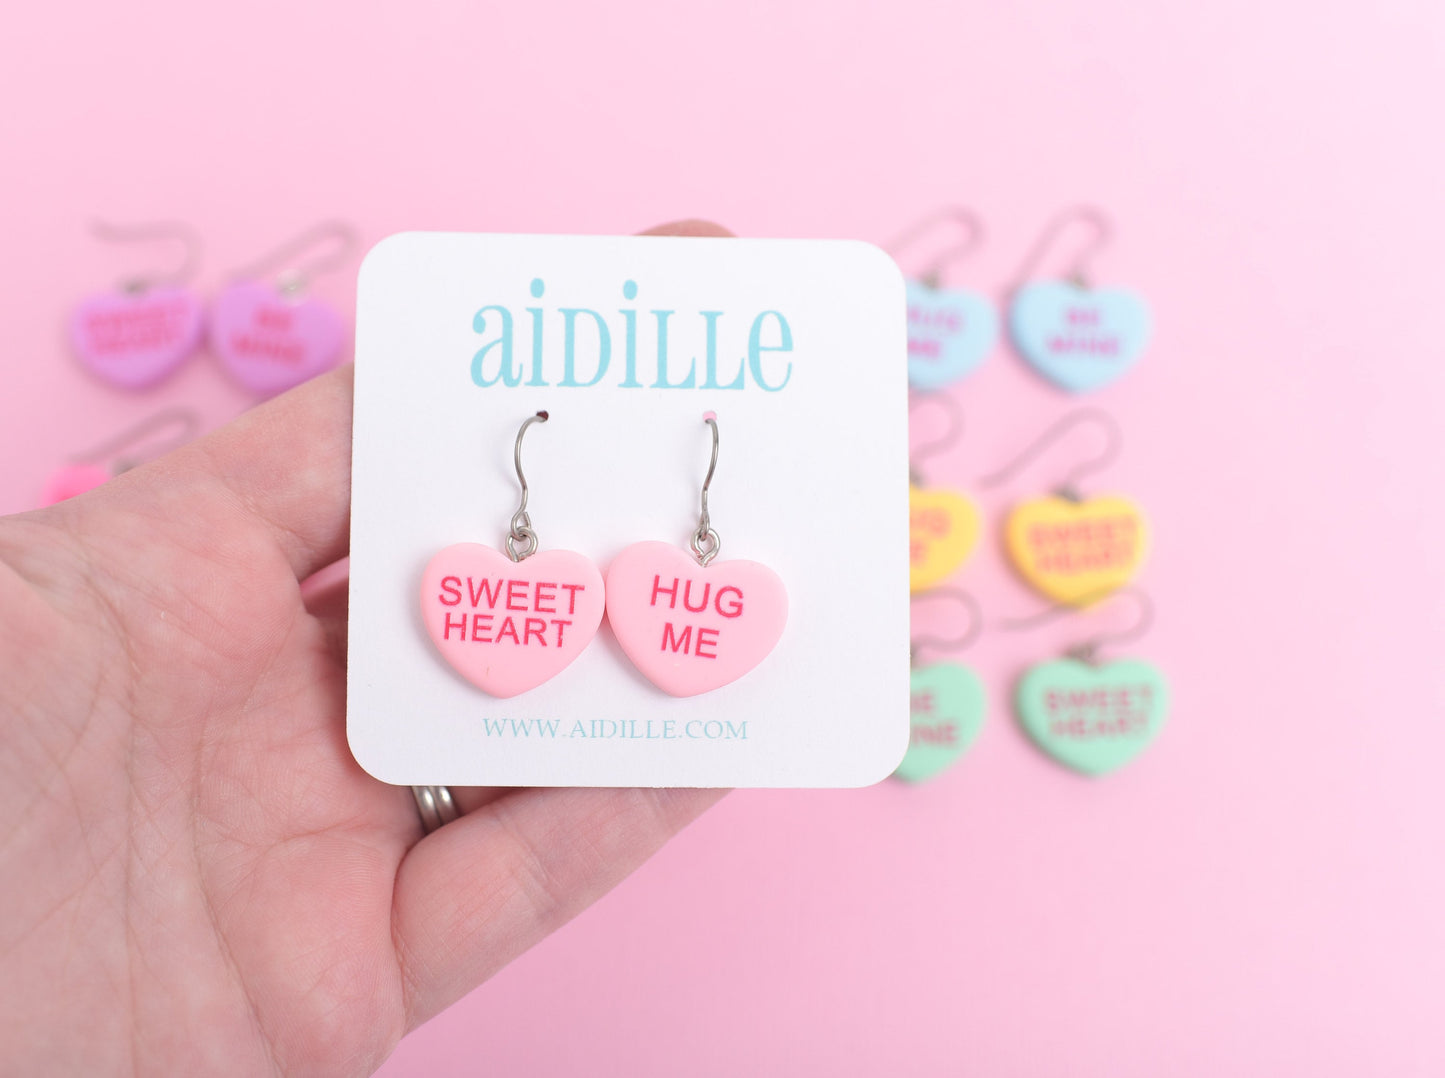 Conversation Heart Earrings with Titanium Ear Wires- Word/Phrase May Vary